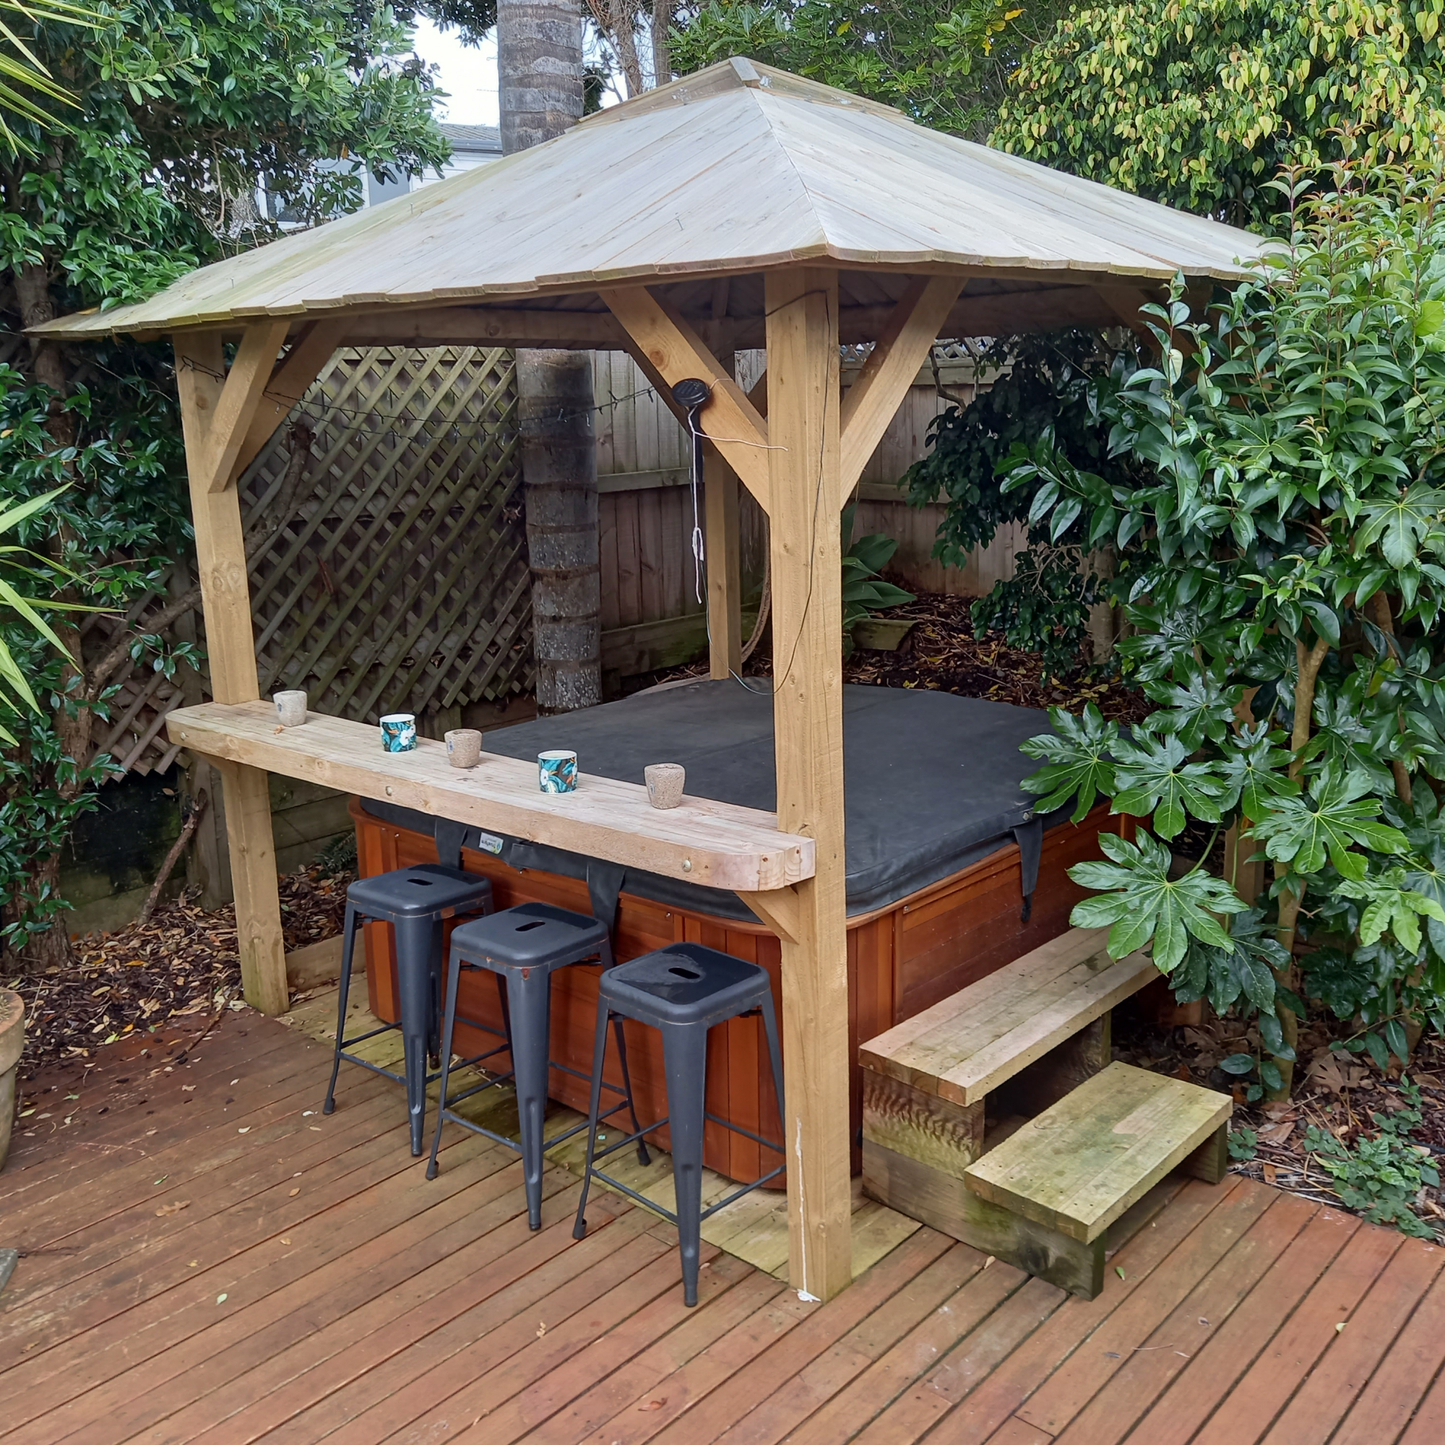 DIY plans to build a rustic 8ft square gazebo suitable for a hot-tub enclosure